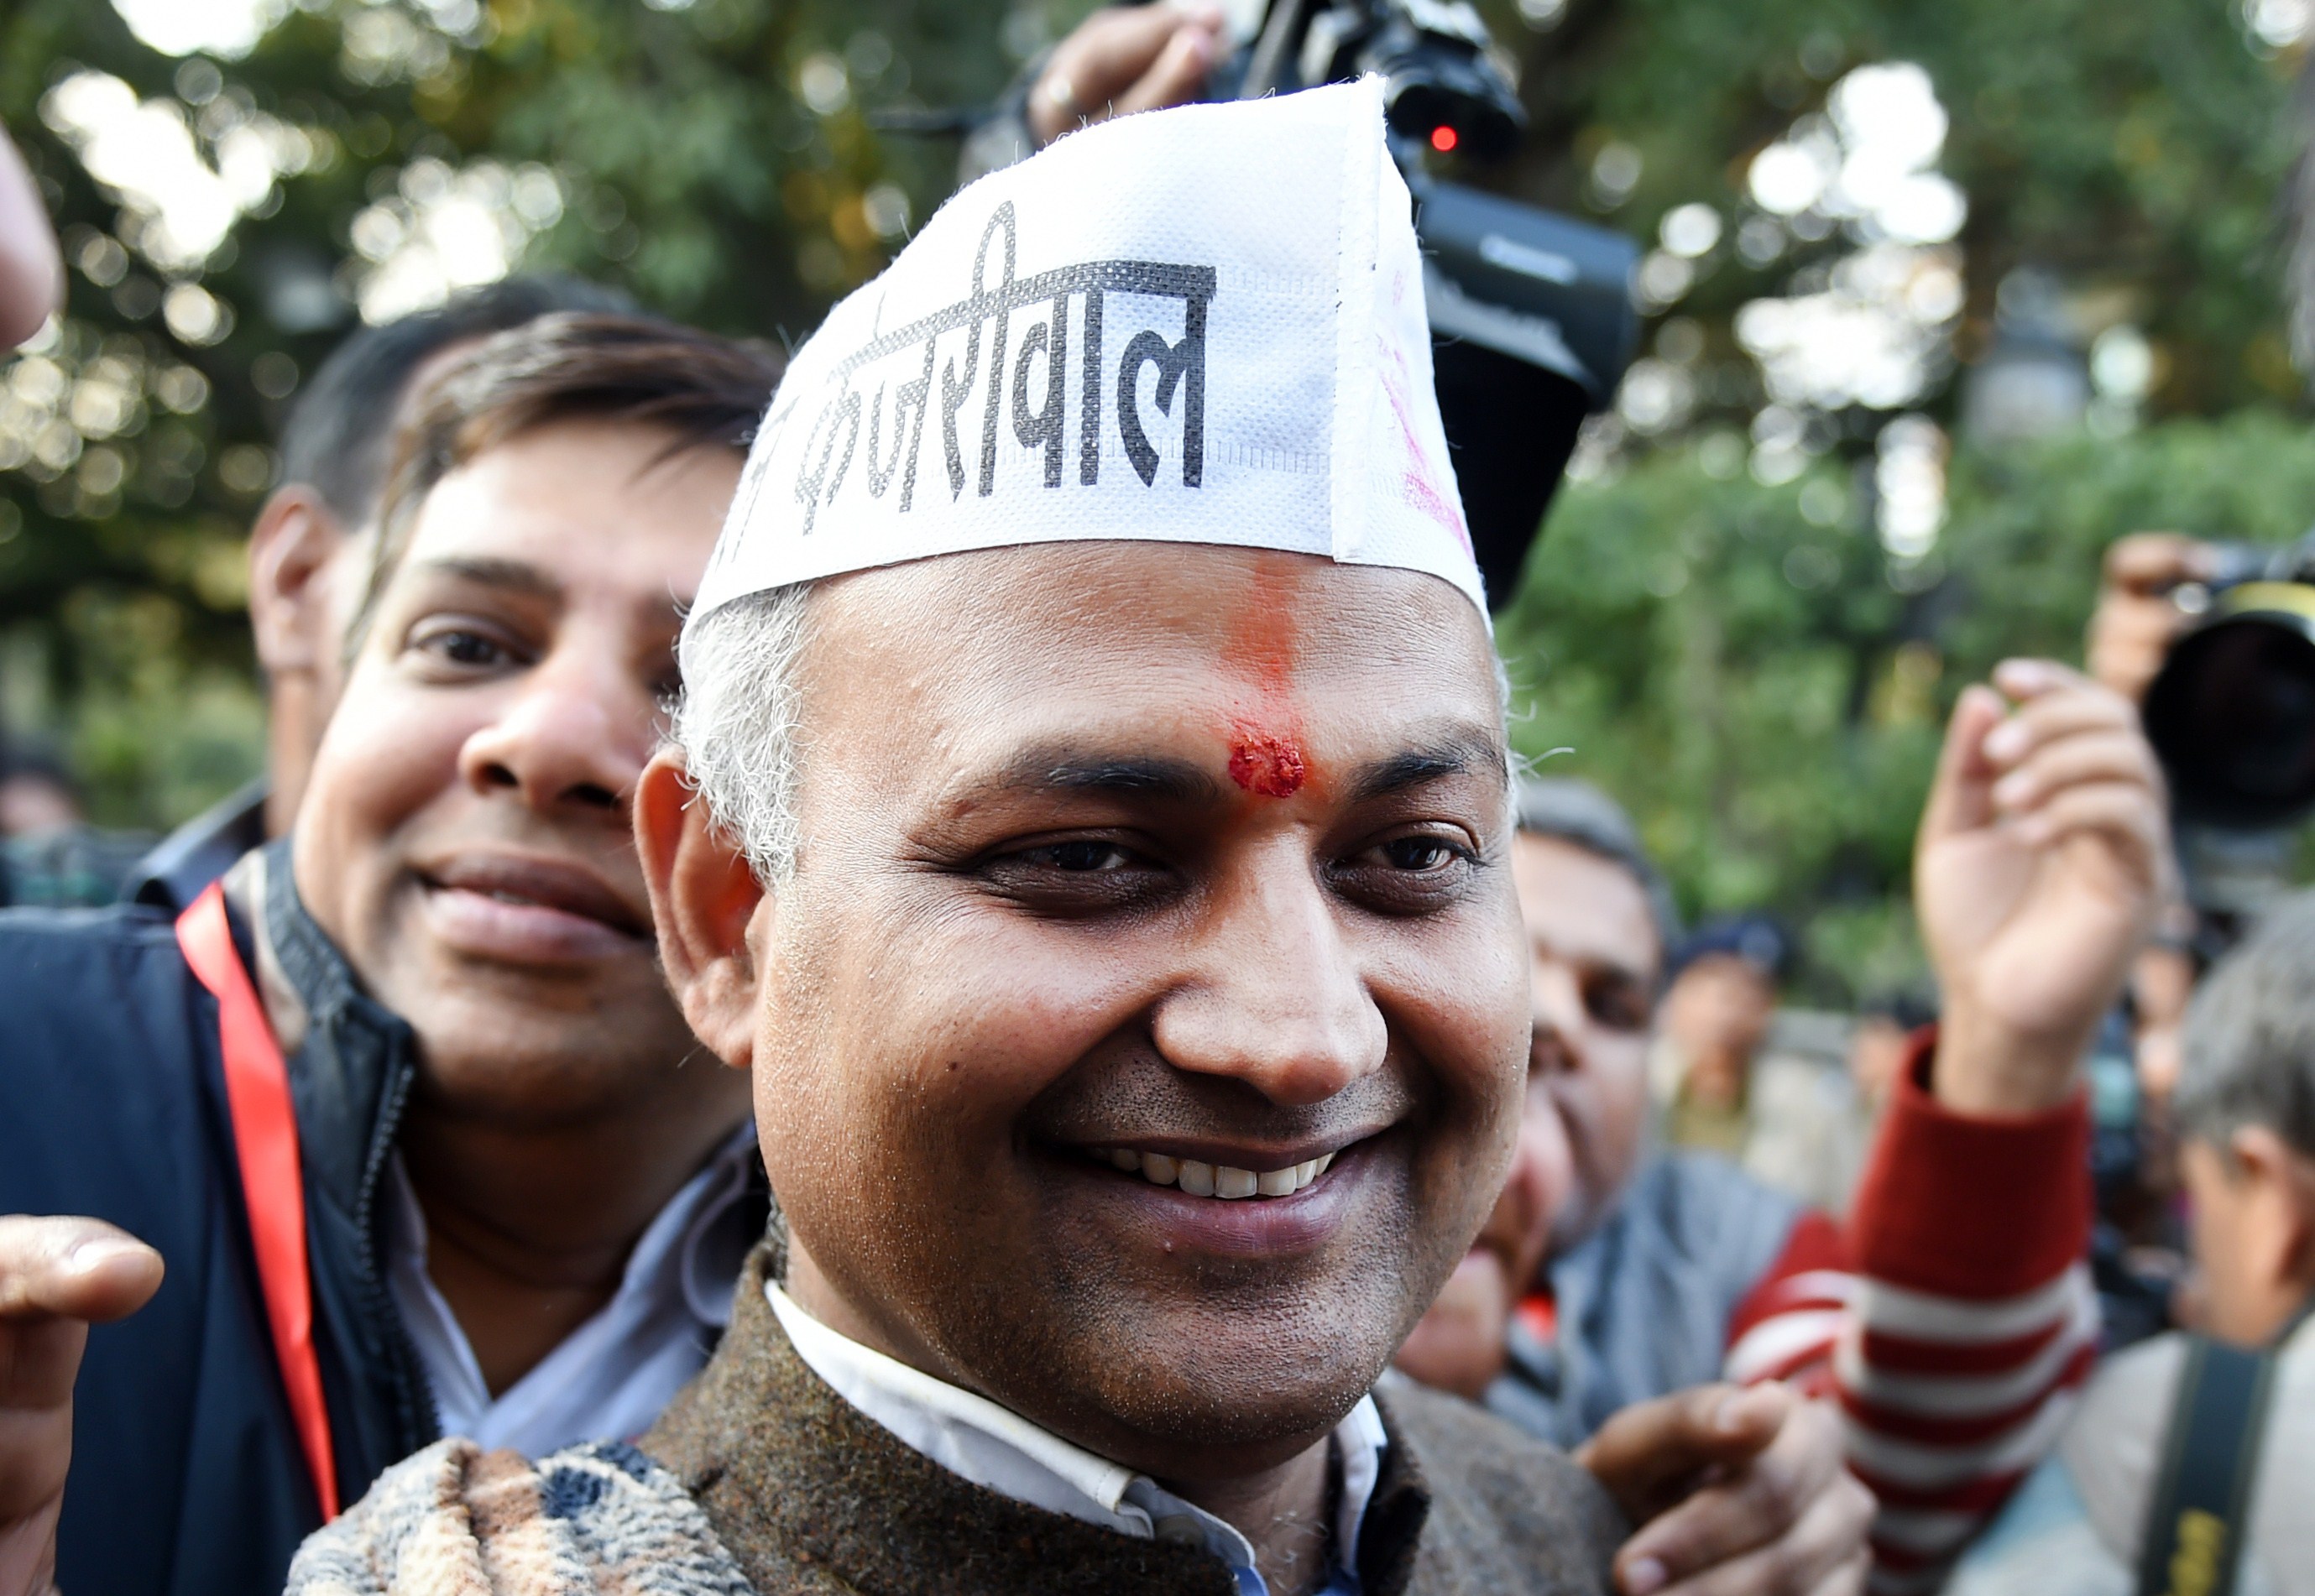 Senior Leader of India's Aam Aadmi Party (AAP) Somnath Bharti (C) arrives for a meeting in New Delhi on February 10, 2015. (SAJJAD HUSSAIN—AFP/Getty Images)